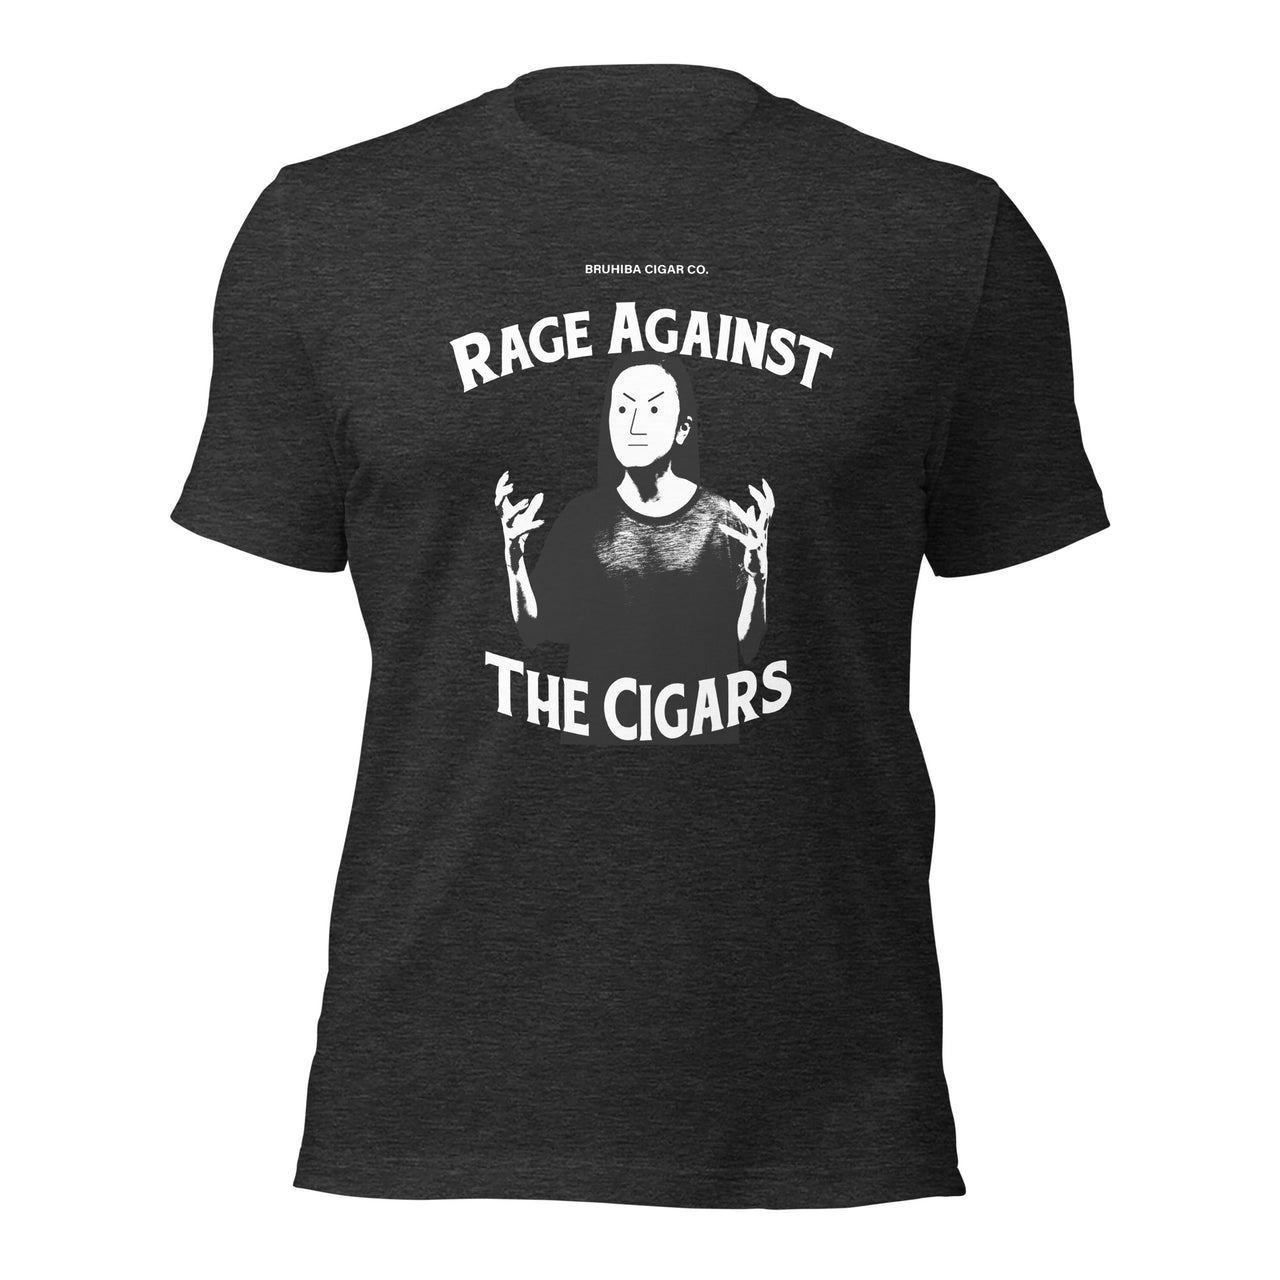 BRUHIBA "Rage Against the Cigars" Exclusive T-Shirt